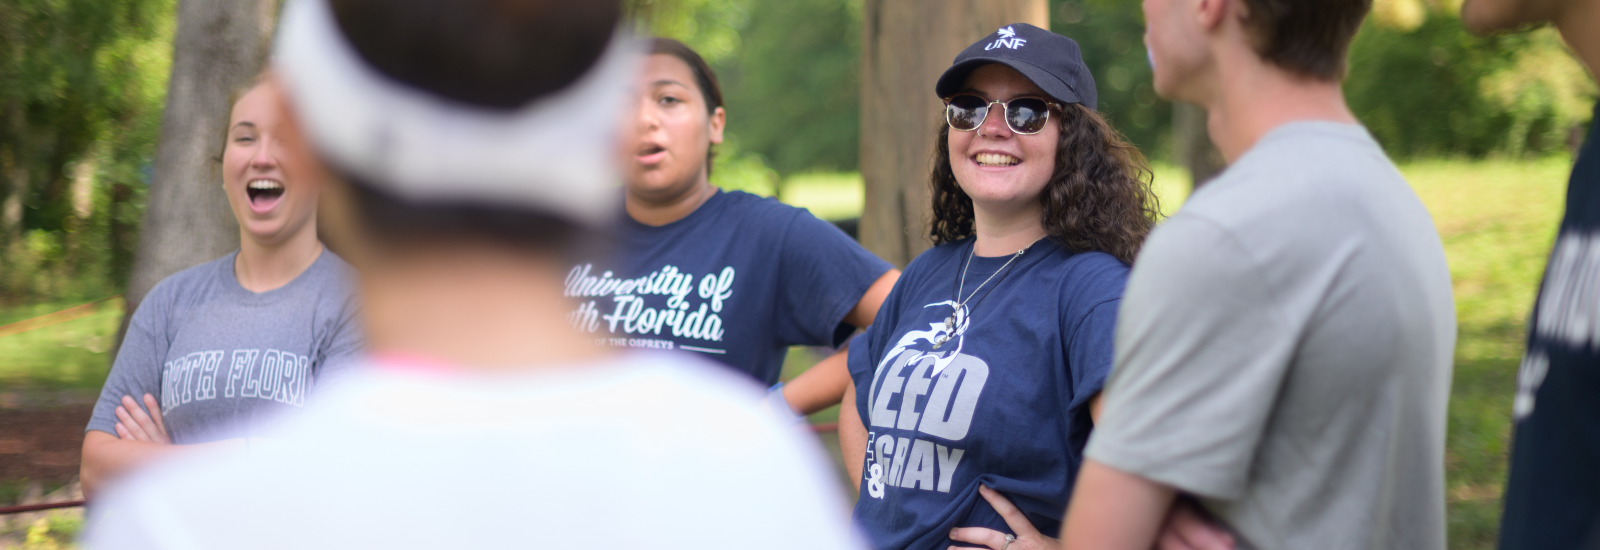 Female in sunglasses, wearing a UNF hat and t-shirt, with several other students out of focus around her